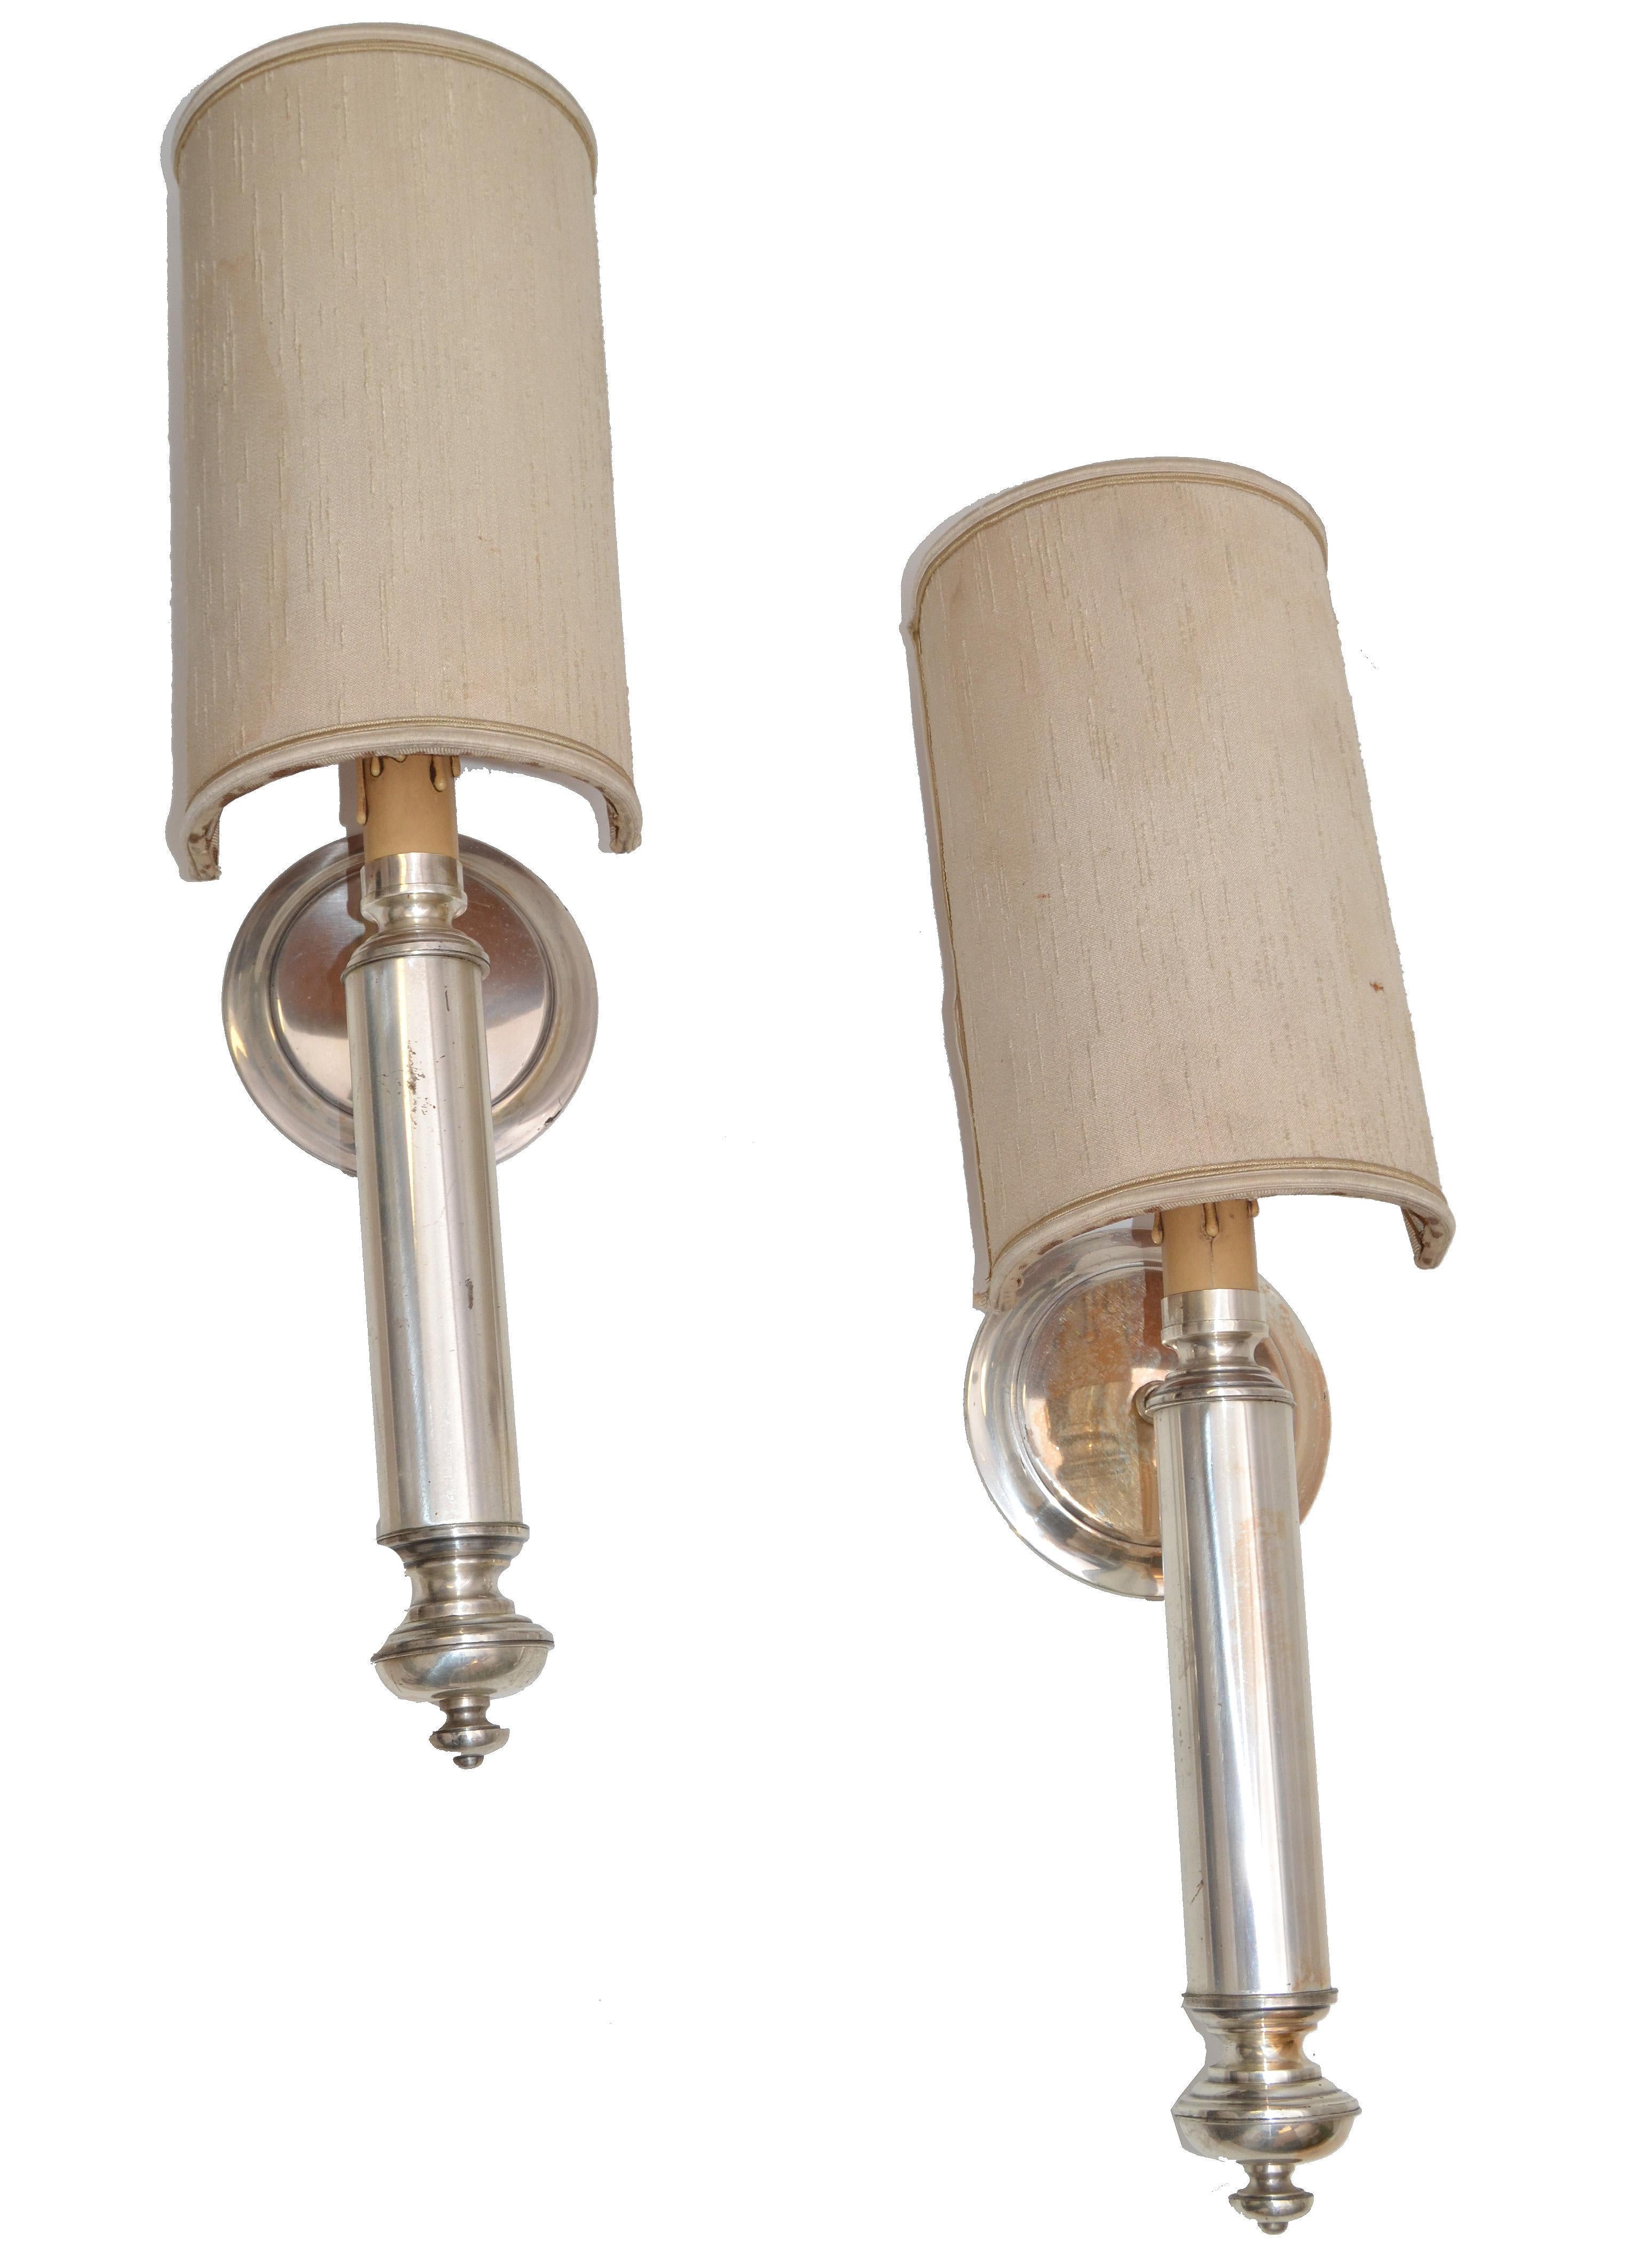 Vintage Maison Lancel Wall Sconces Silver Finish with Original Half Shade, Pair For Sale 3